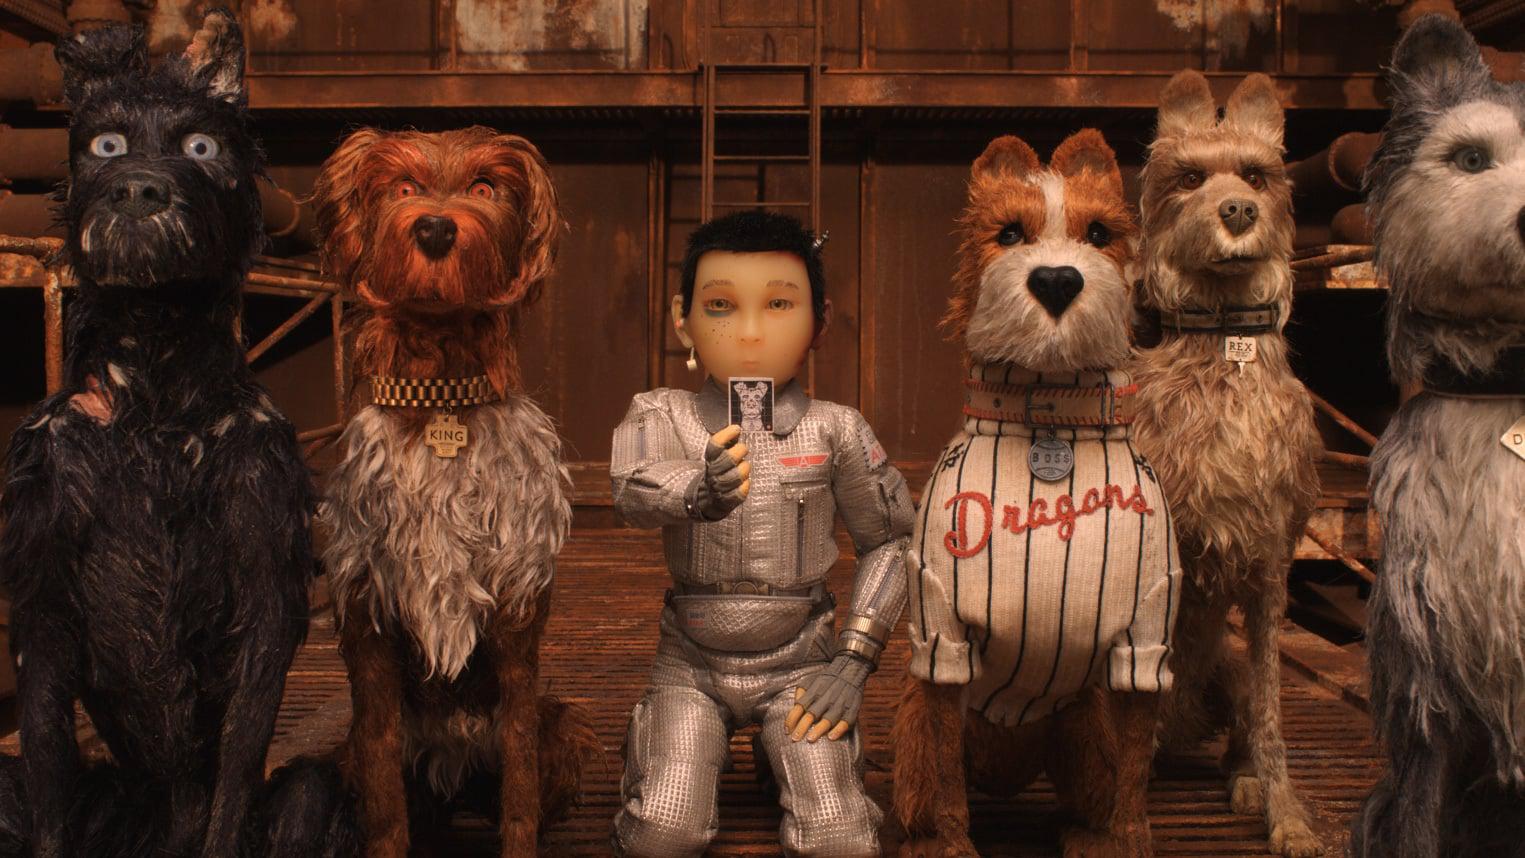 Backdrop Image for Isle of Dogs